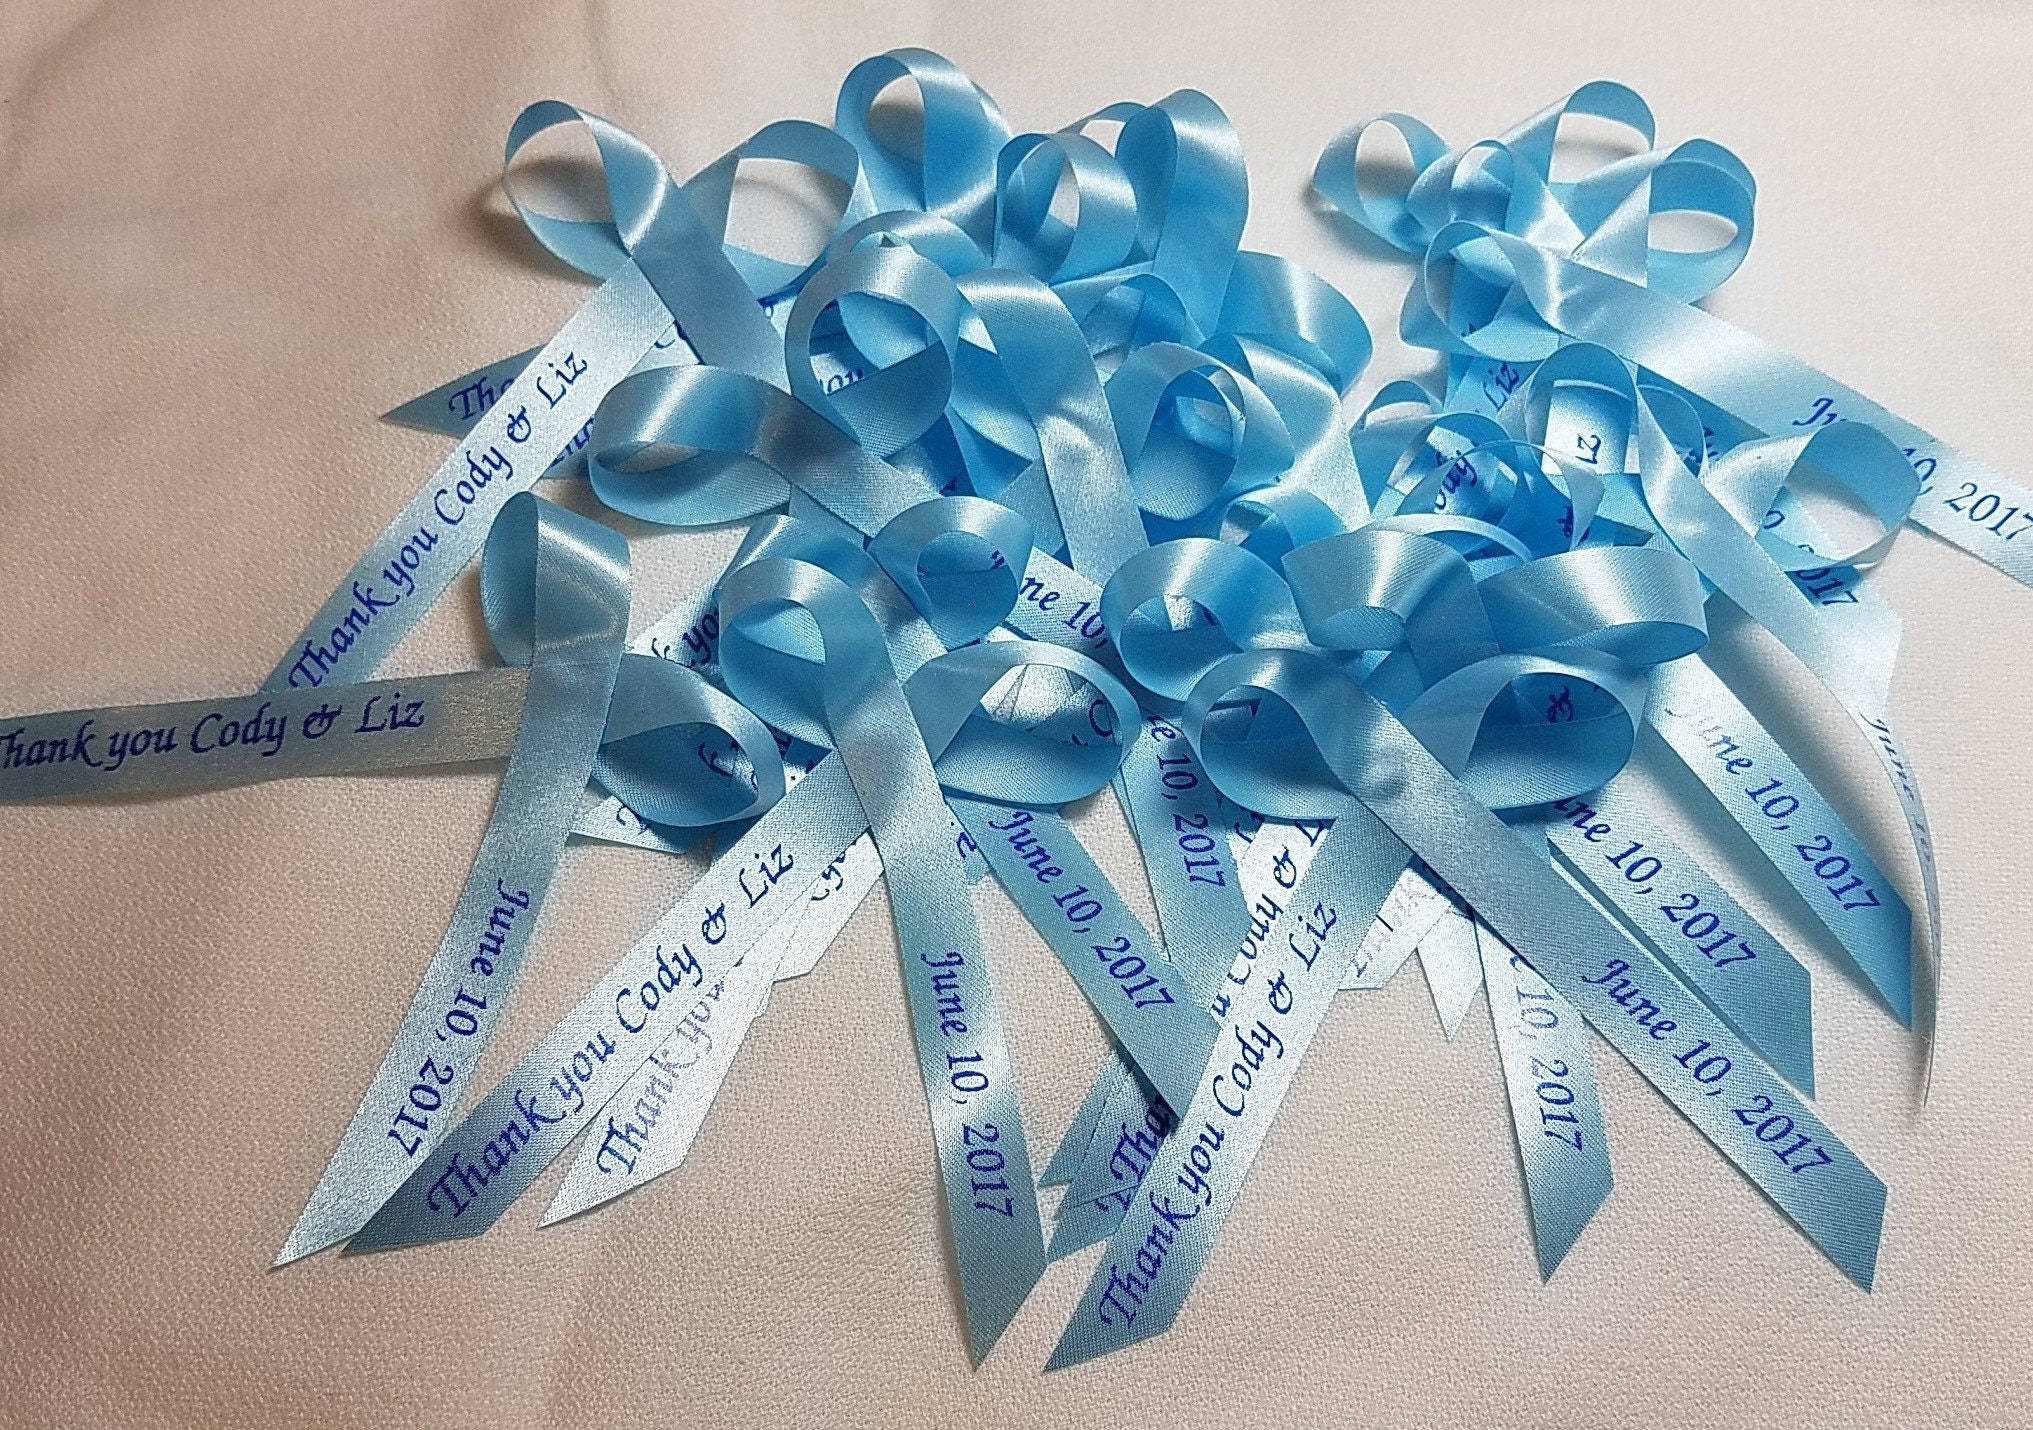 Blue Personalized Ribbons Baby Shower, Bridal Shower Wedding or Birthday  Celebration Party Favor Assembled Ribbons Pack of 25 